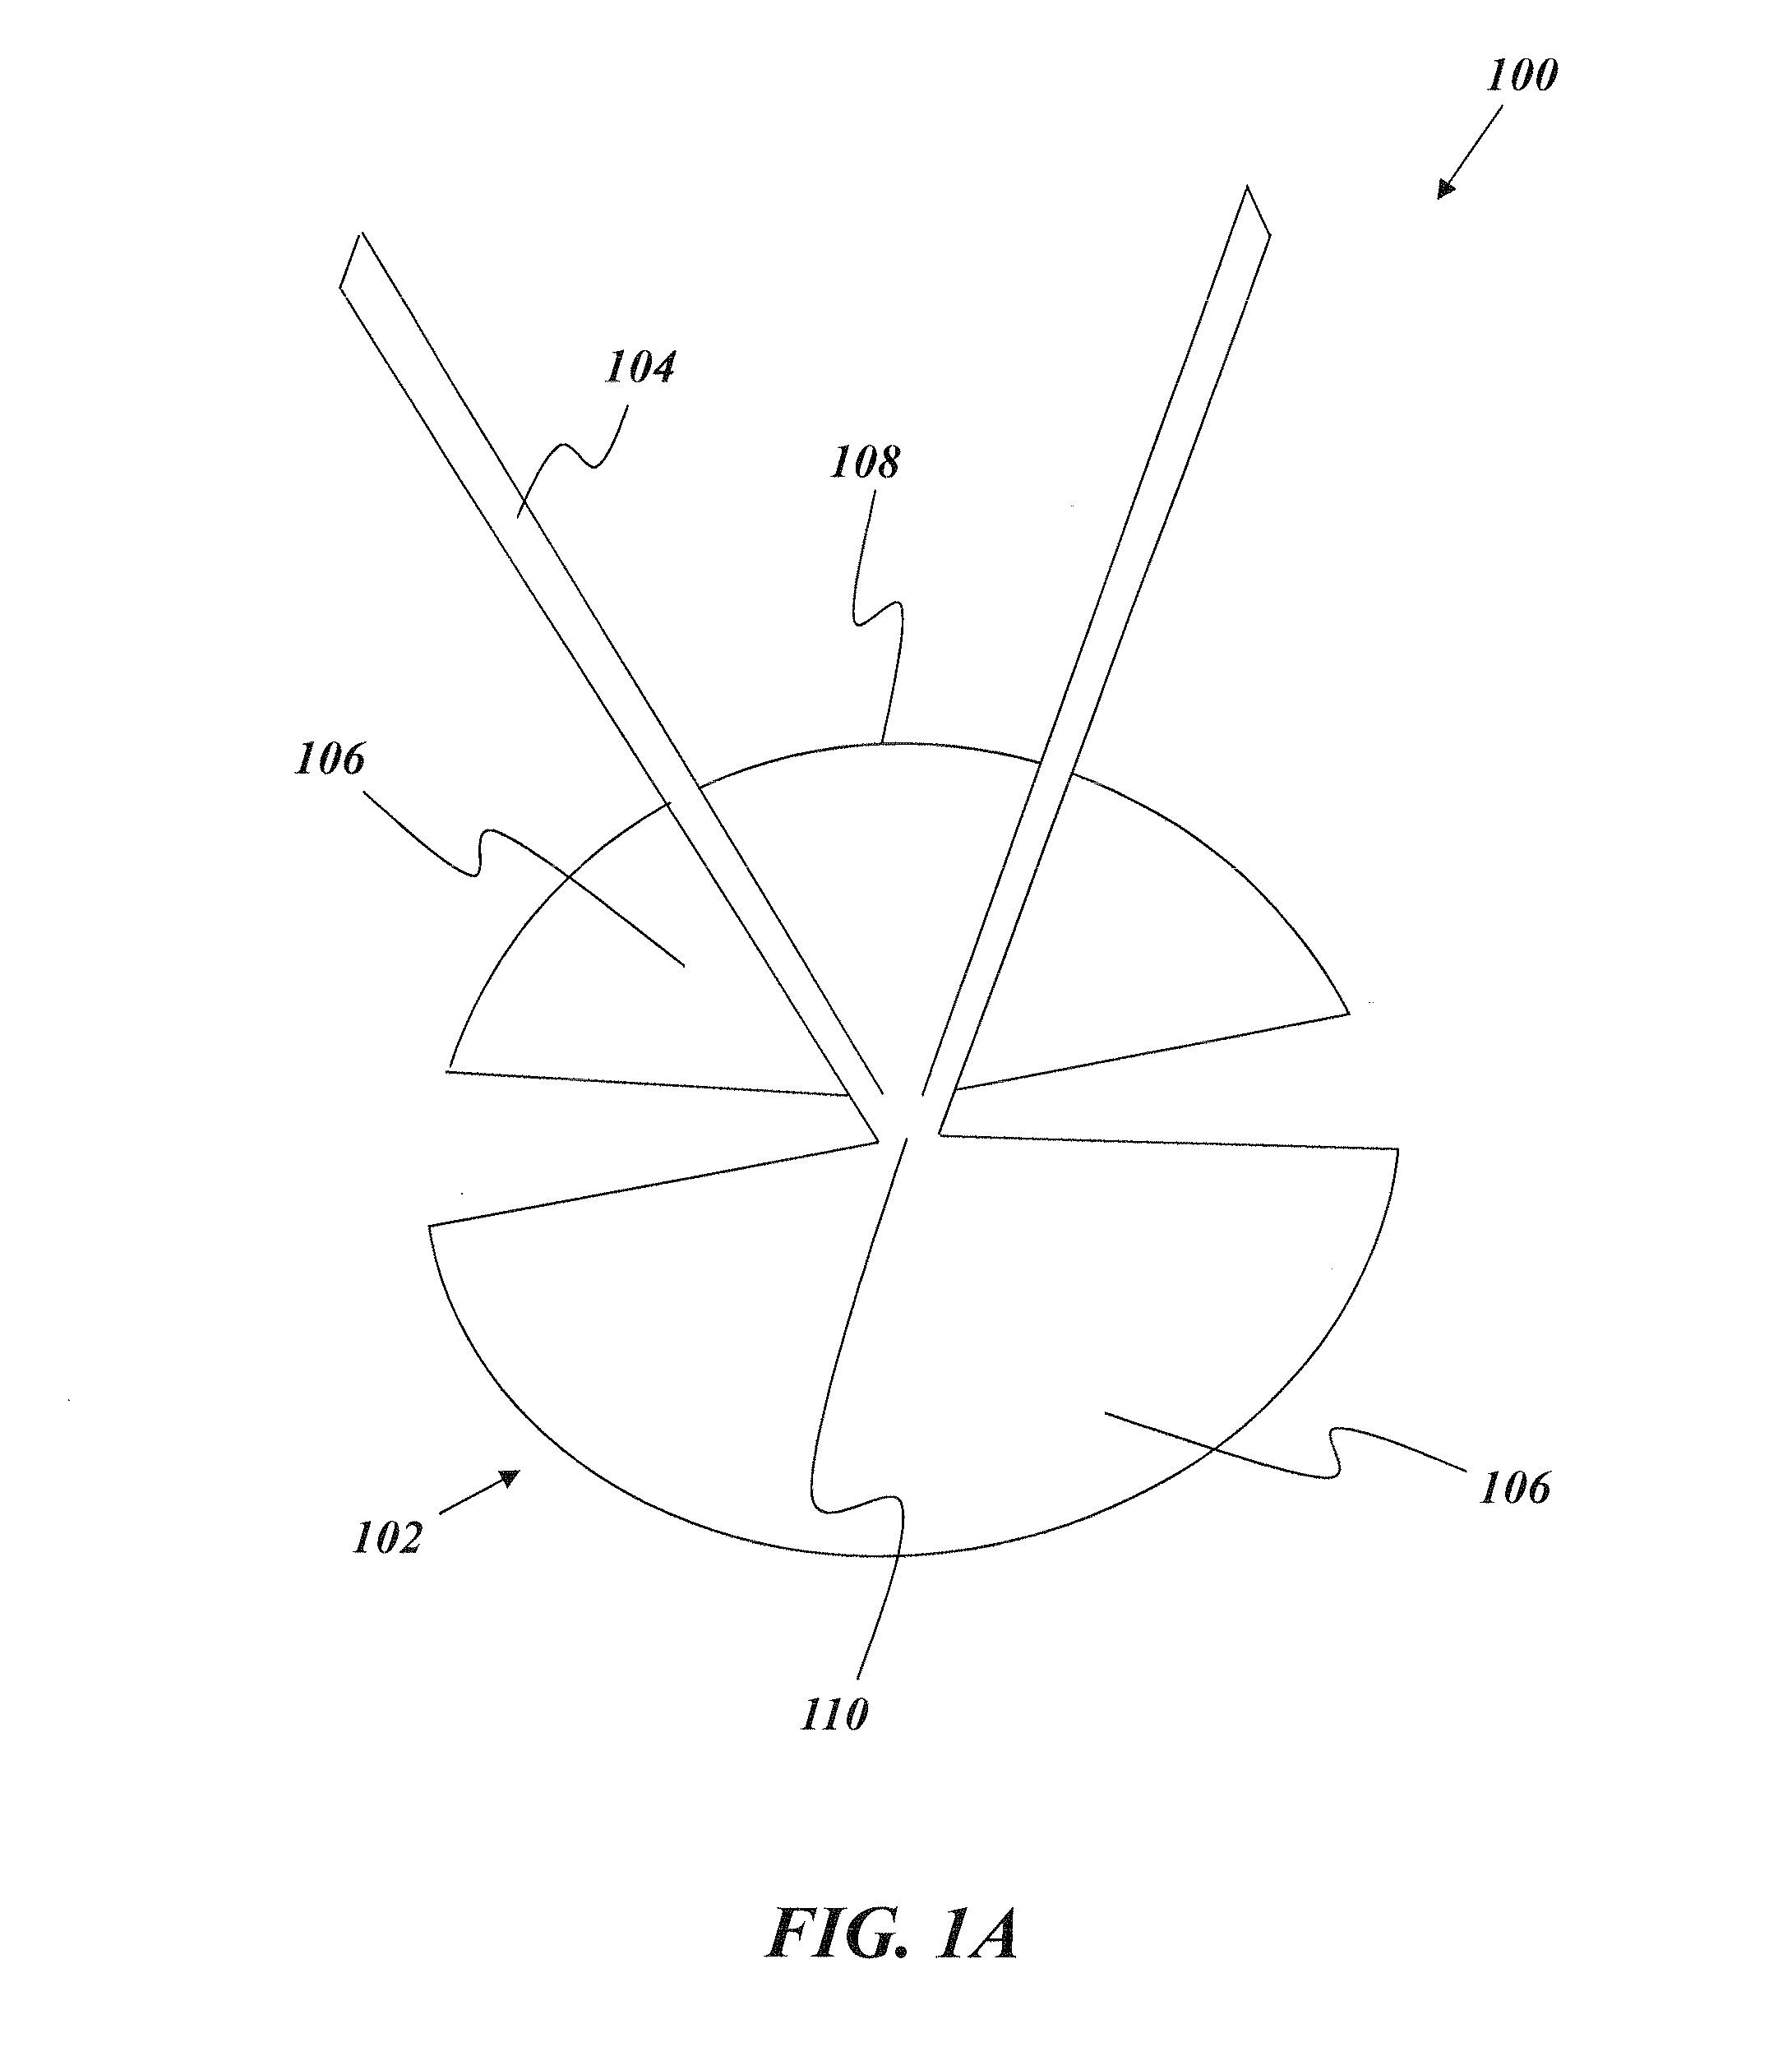 Removable deployment device, system, and method for implantable prostheses